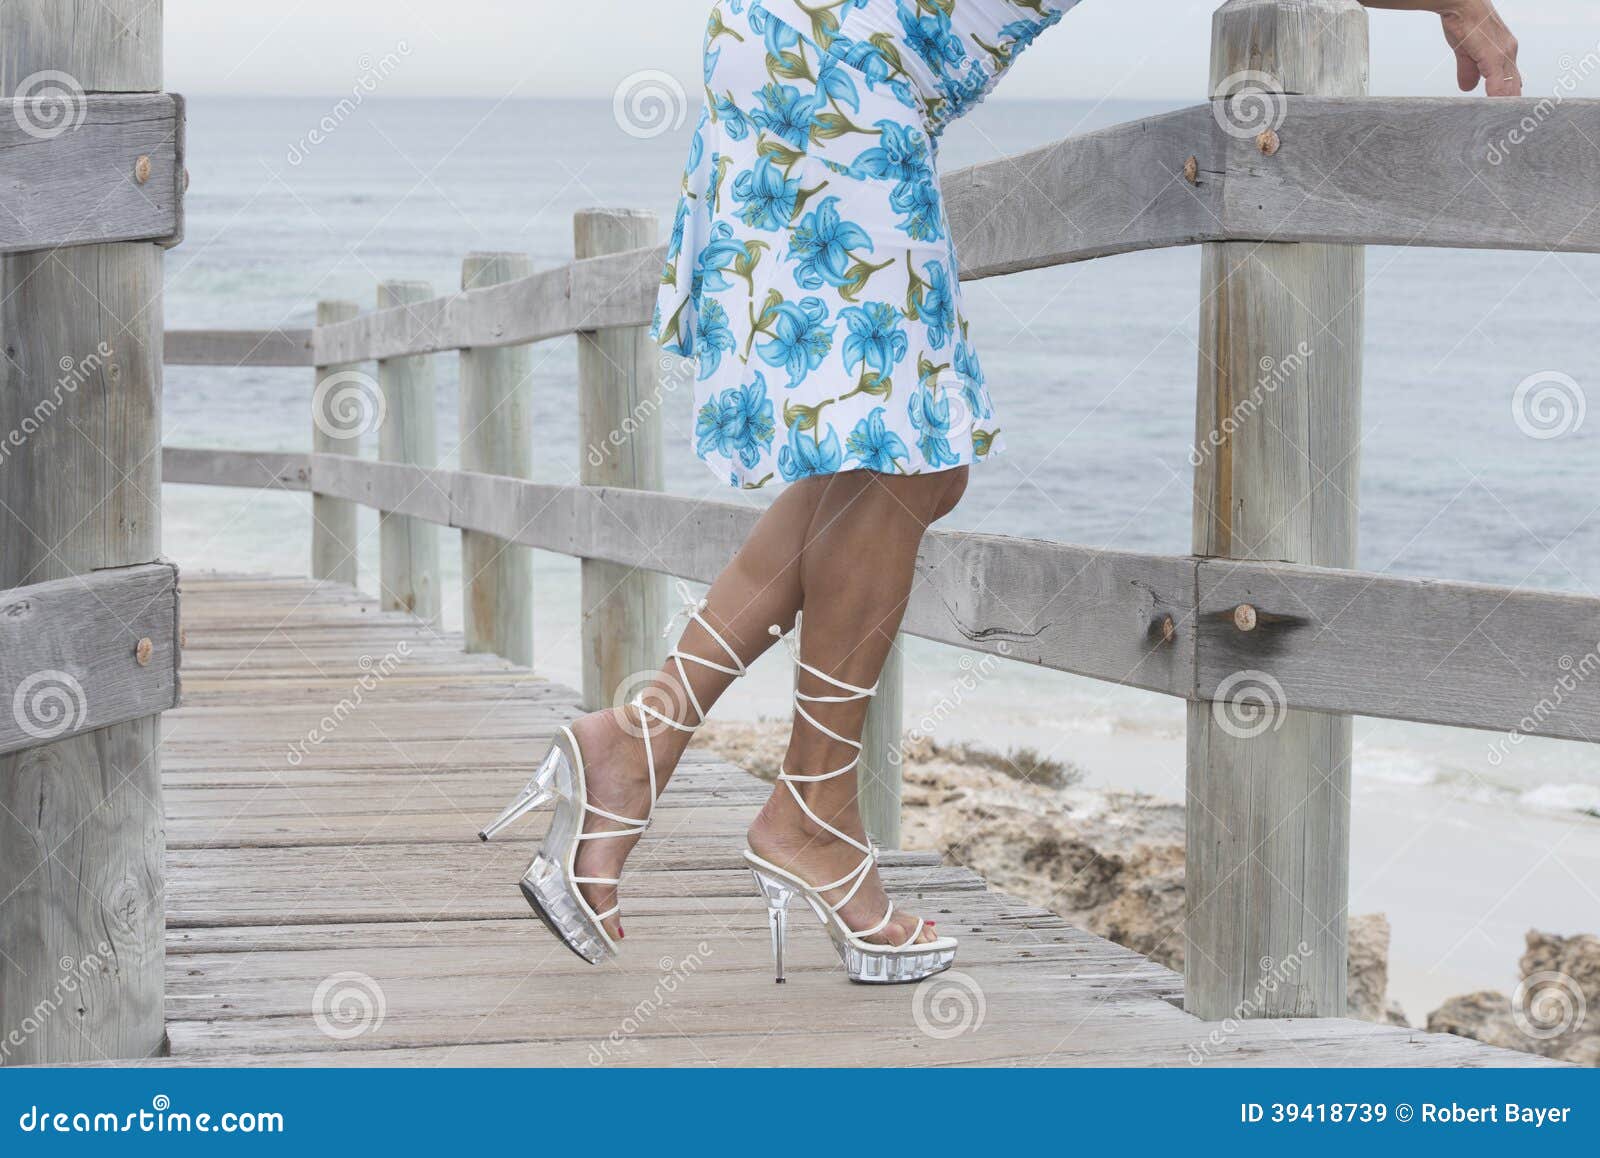 Pretty Woman in Lingerie Putting on Some High Heels on Her Nice Long Legs  Stock Image - Image of heels, provocative: 169233801